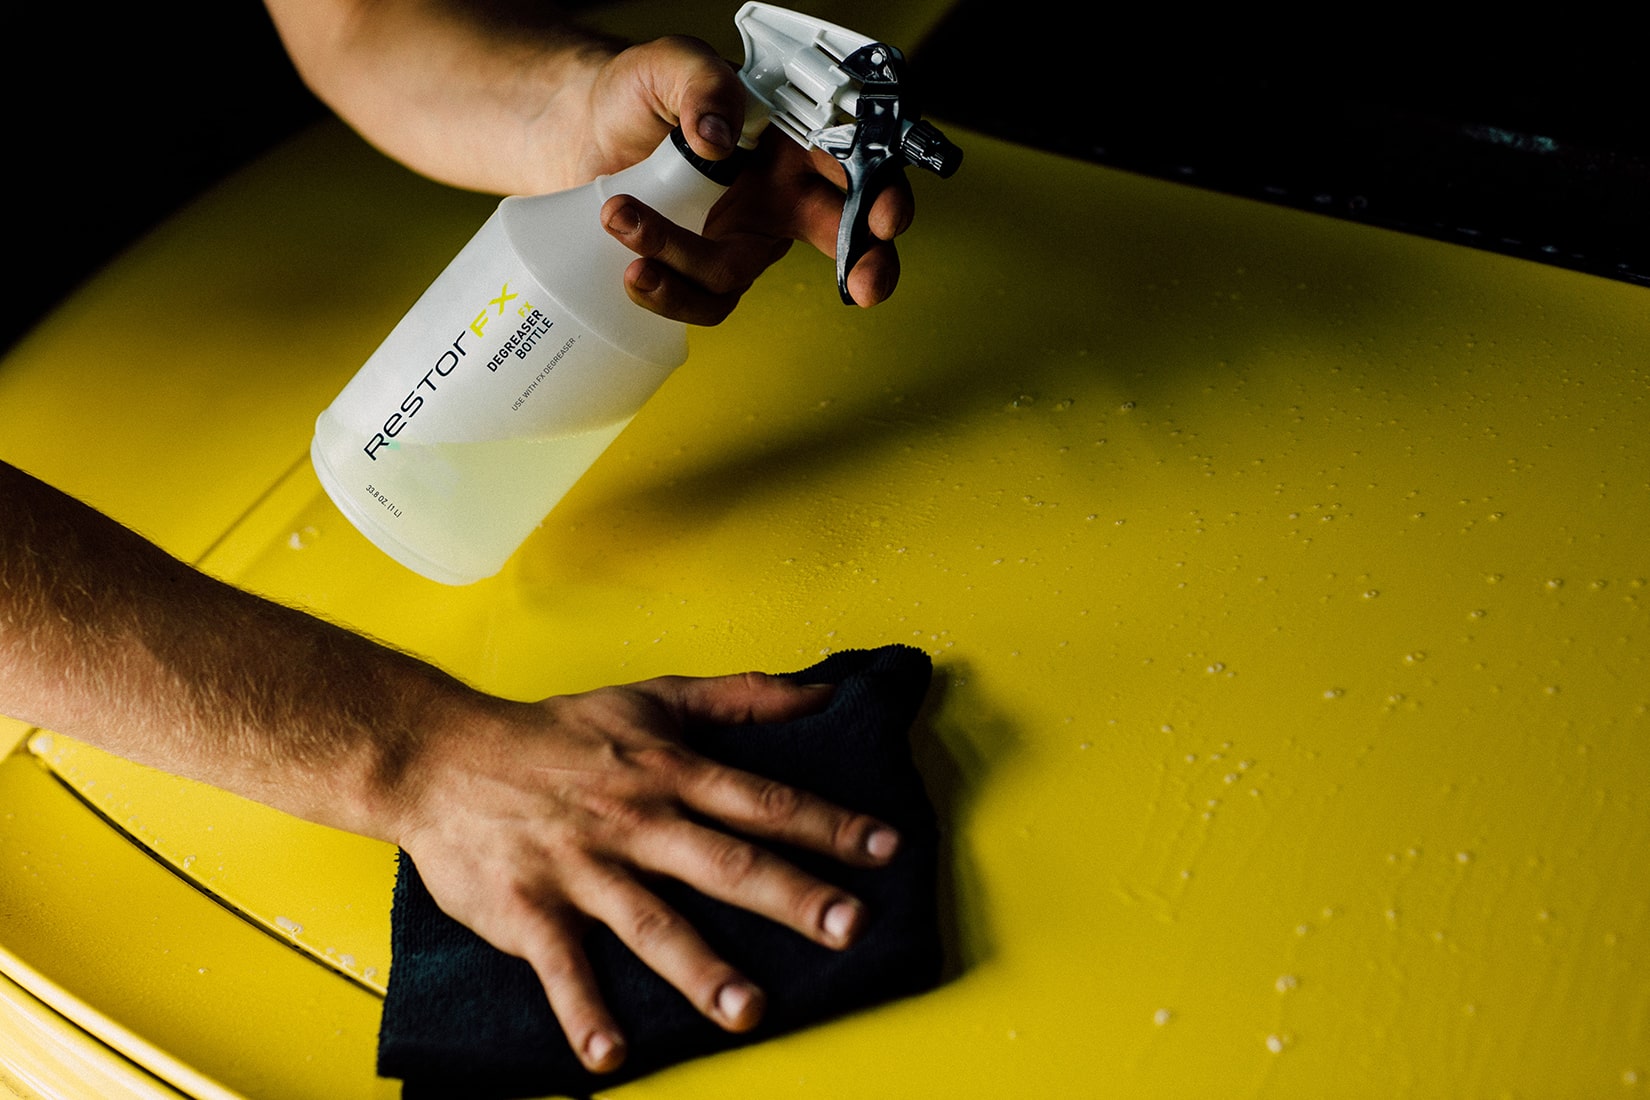 A RestorFX technician spraying and wiping the surface of a yellow sports car with FX Degreaser